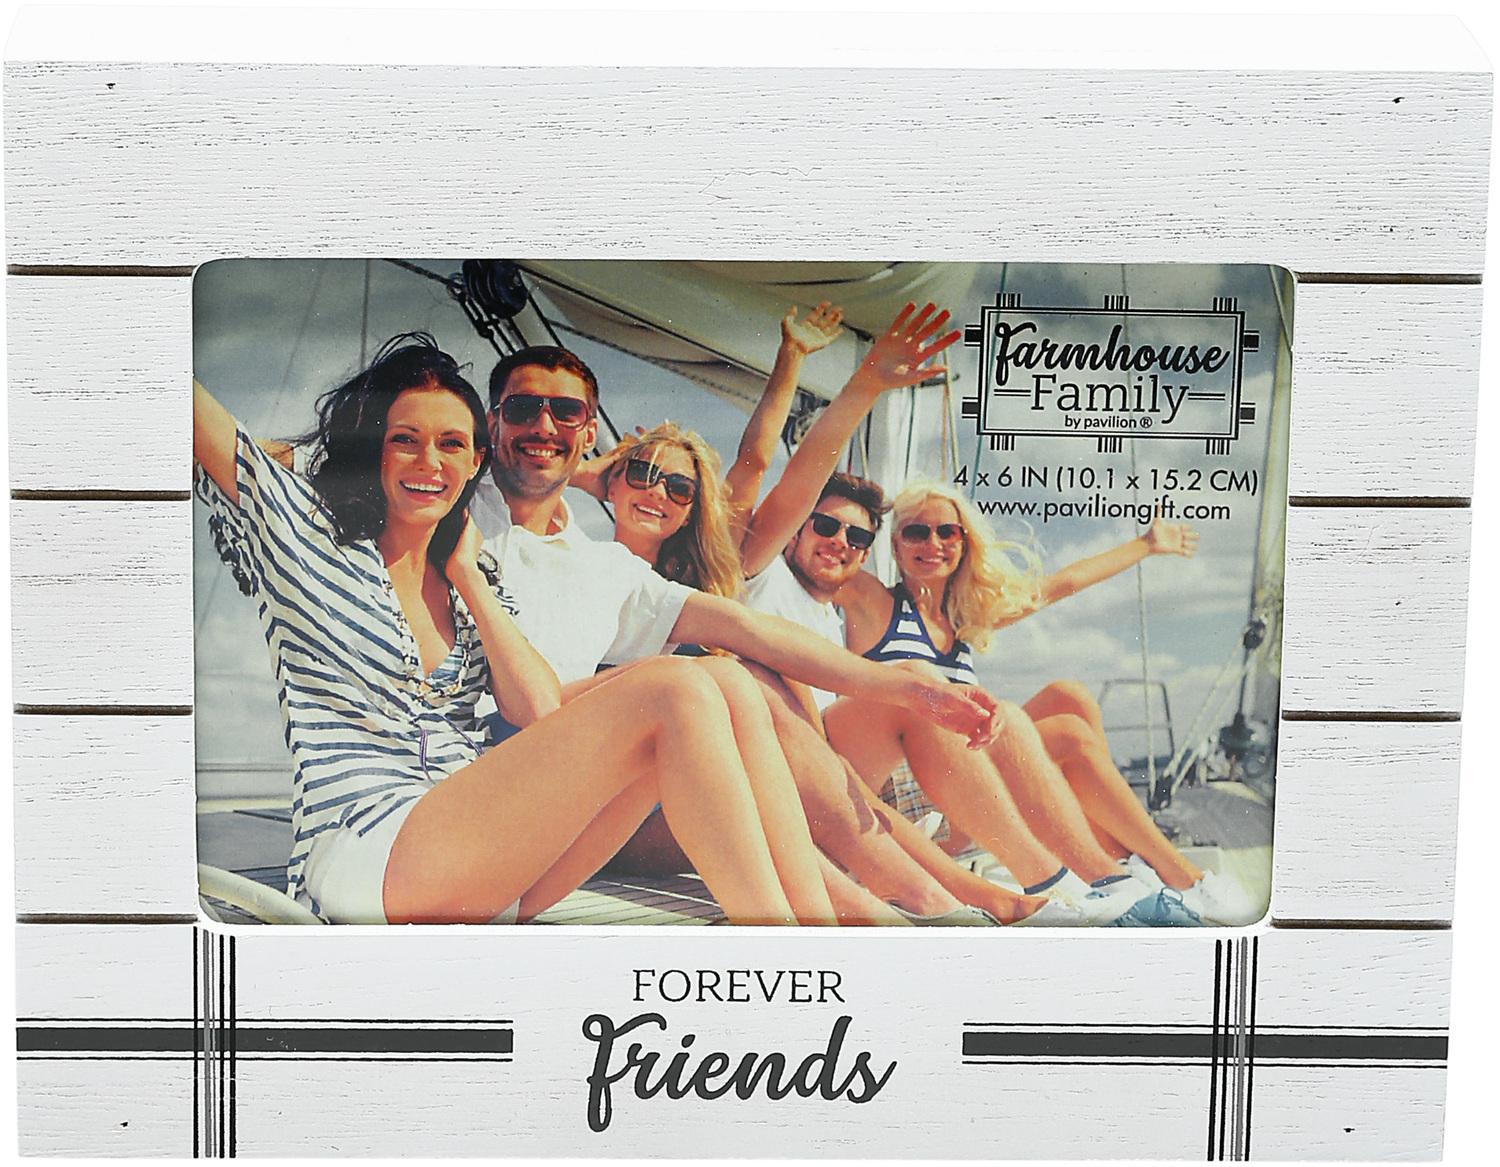 Friends by Farmhouse Family - Friends - 7.5" x 6" Frame
(Holds 6" x 4" Photo)